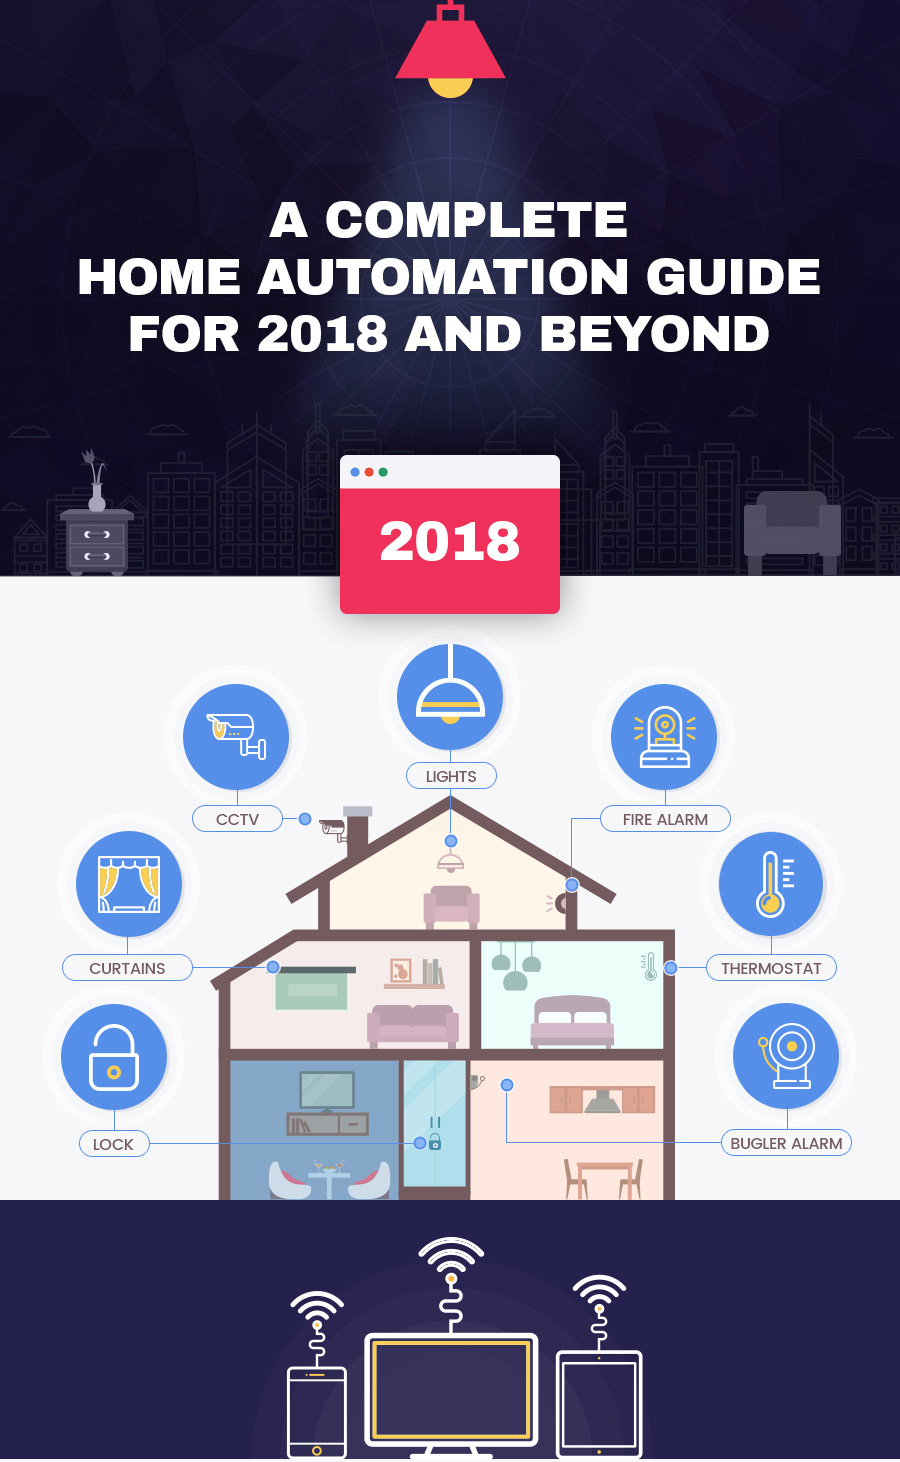 Home Automation Tips for 2018 and Beyond